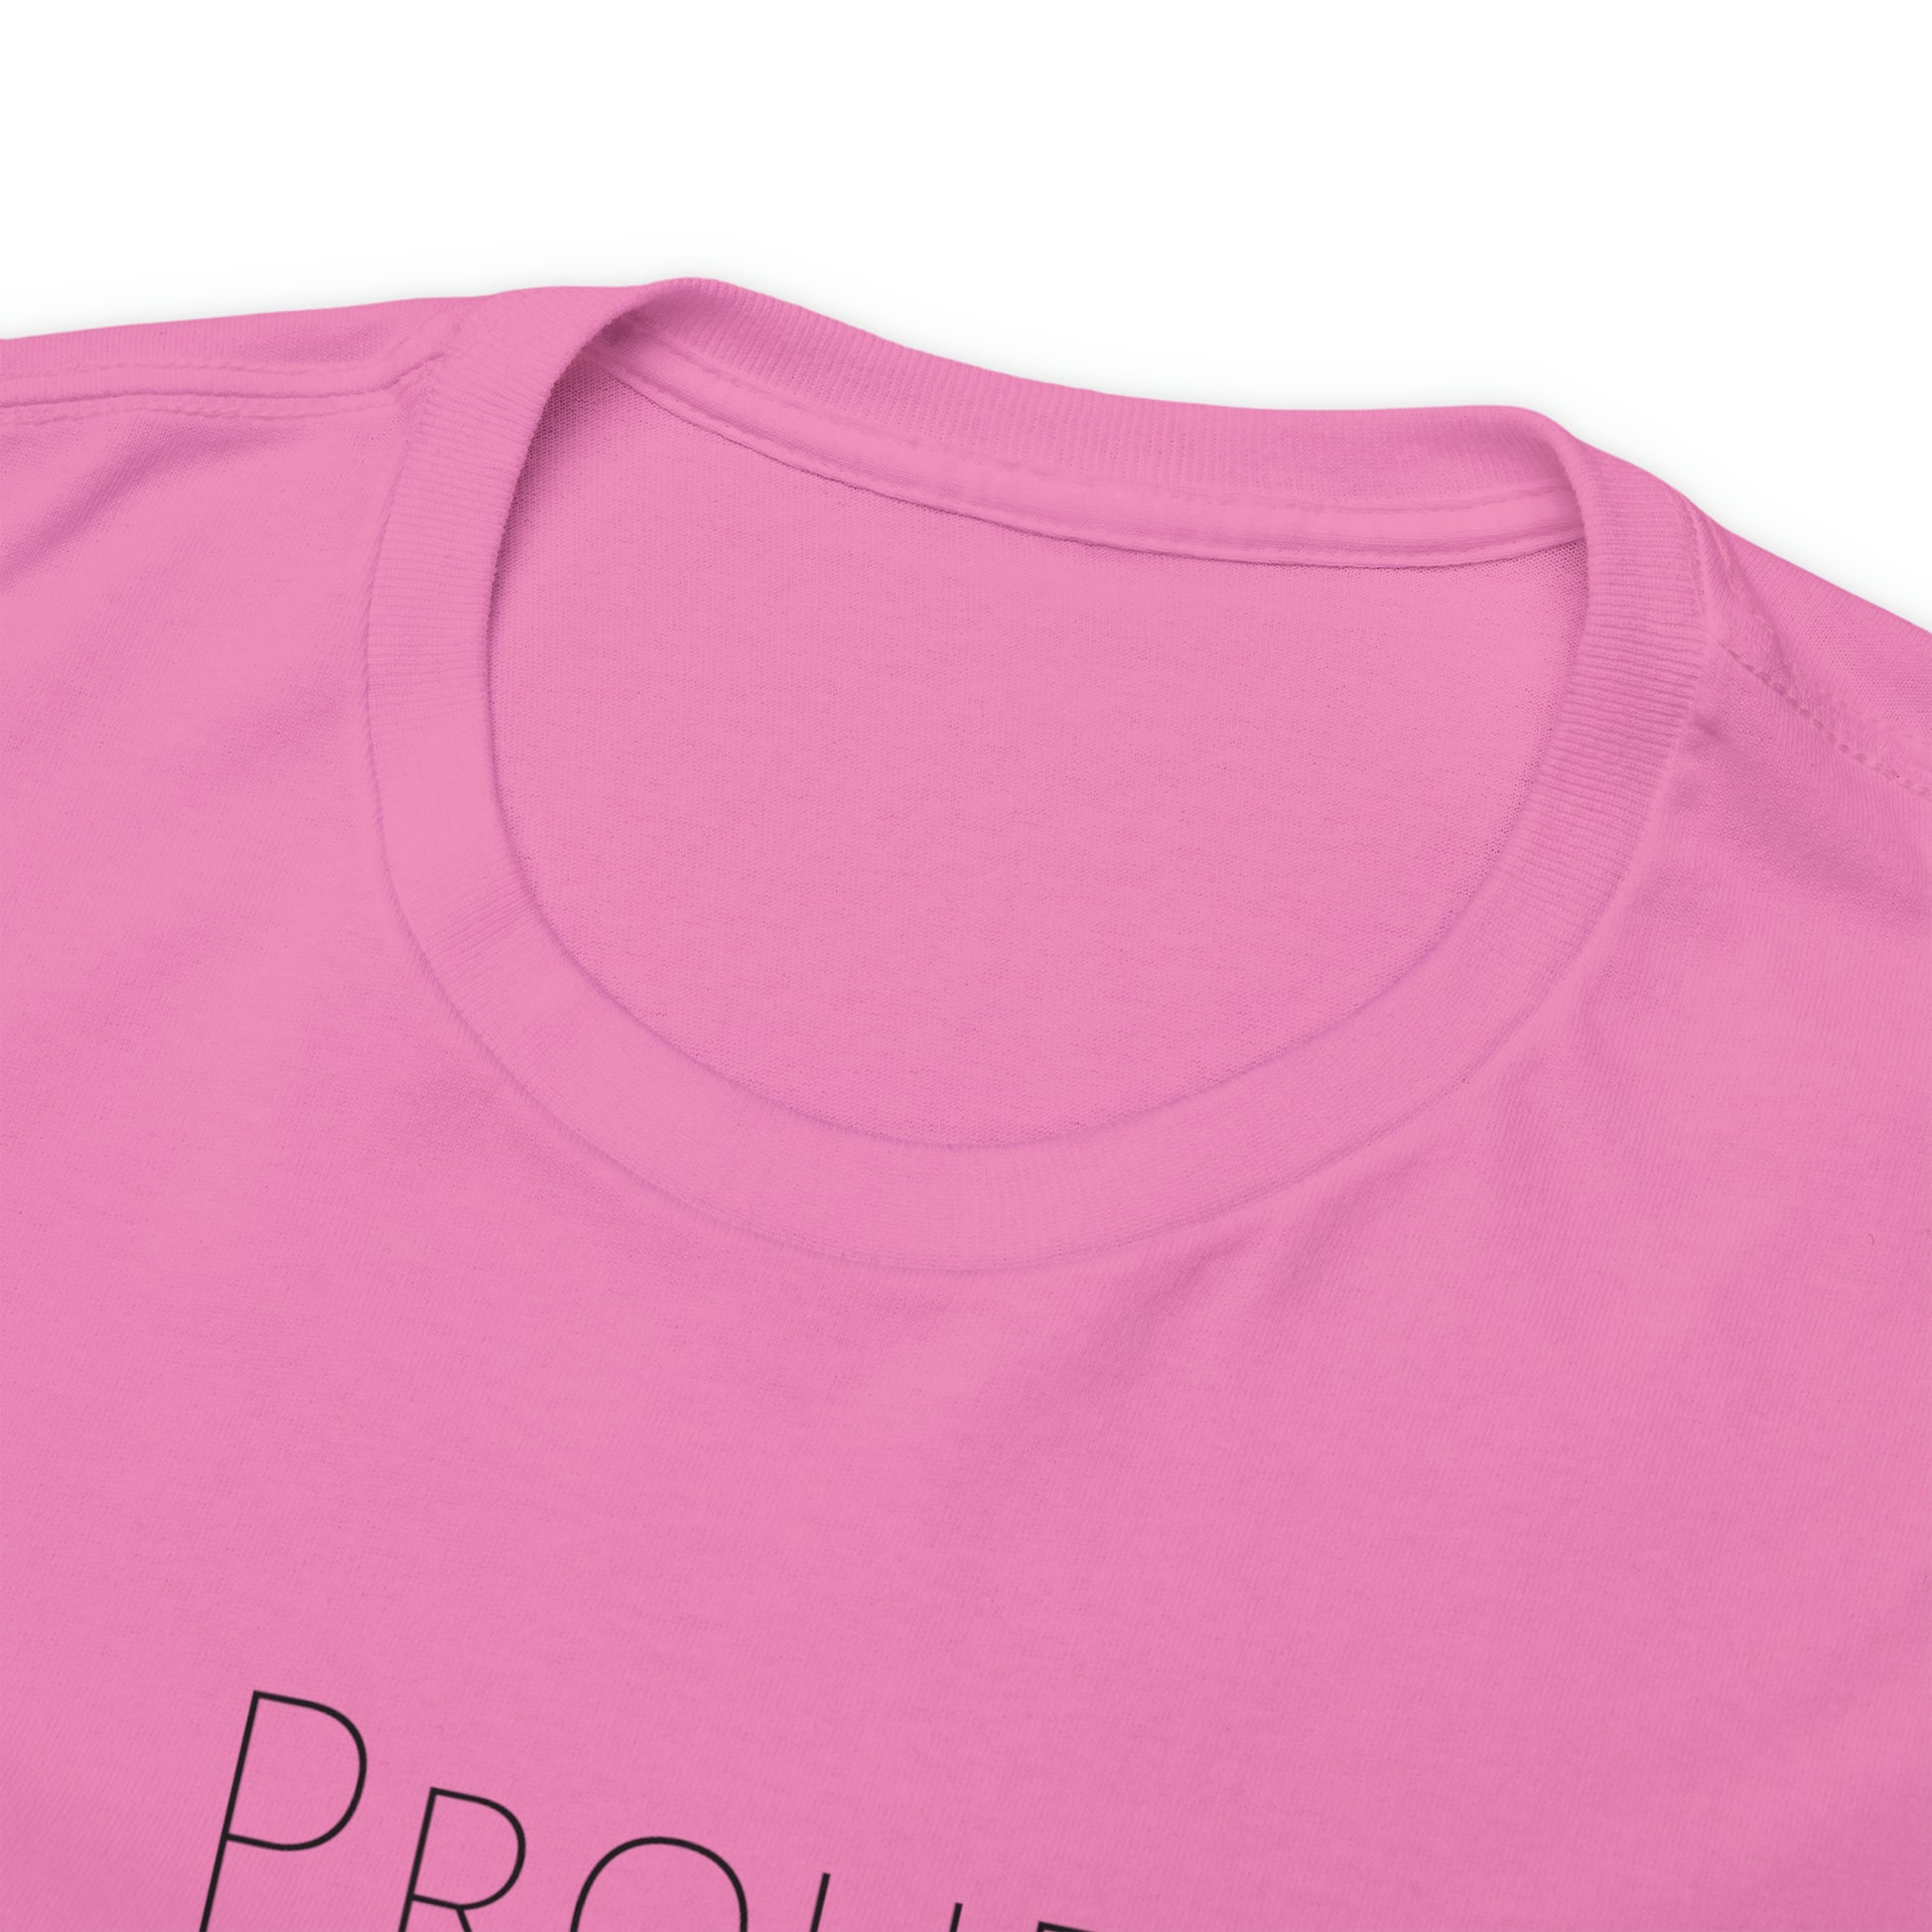 "Proud MawMaw" T-shirt - Weave Got Gifts - Unique Gifts You Won’t Find Anywhere Else!